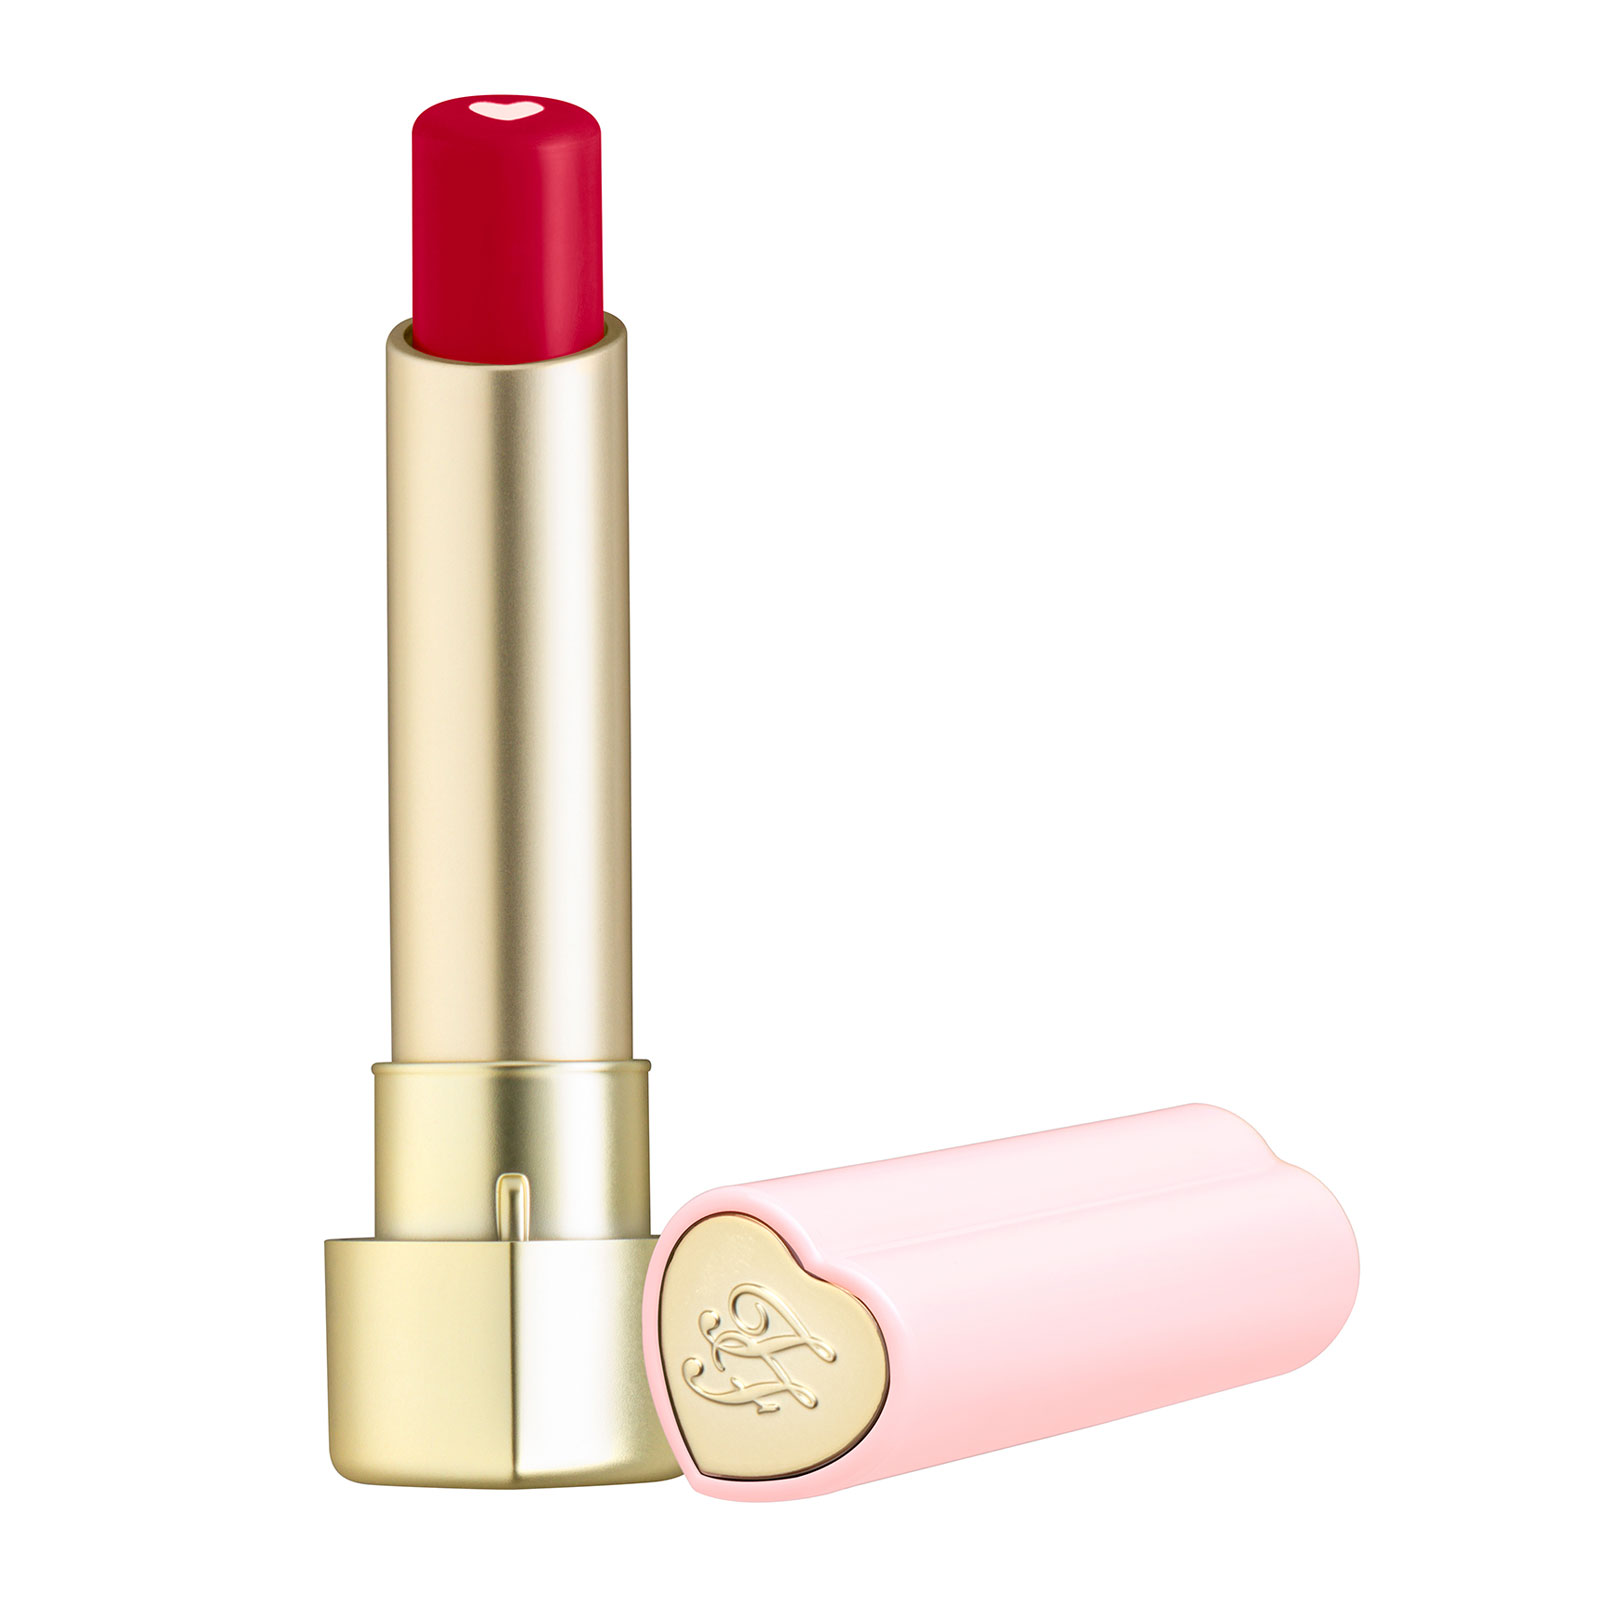 too faced too femme heart core lipstick 2.8g crazy for you